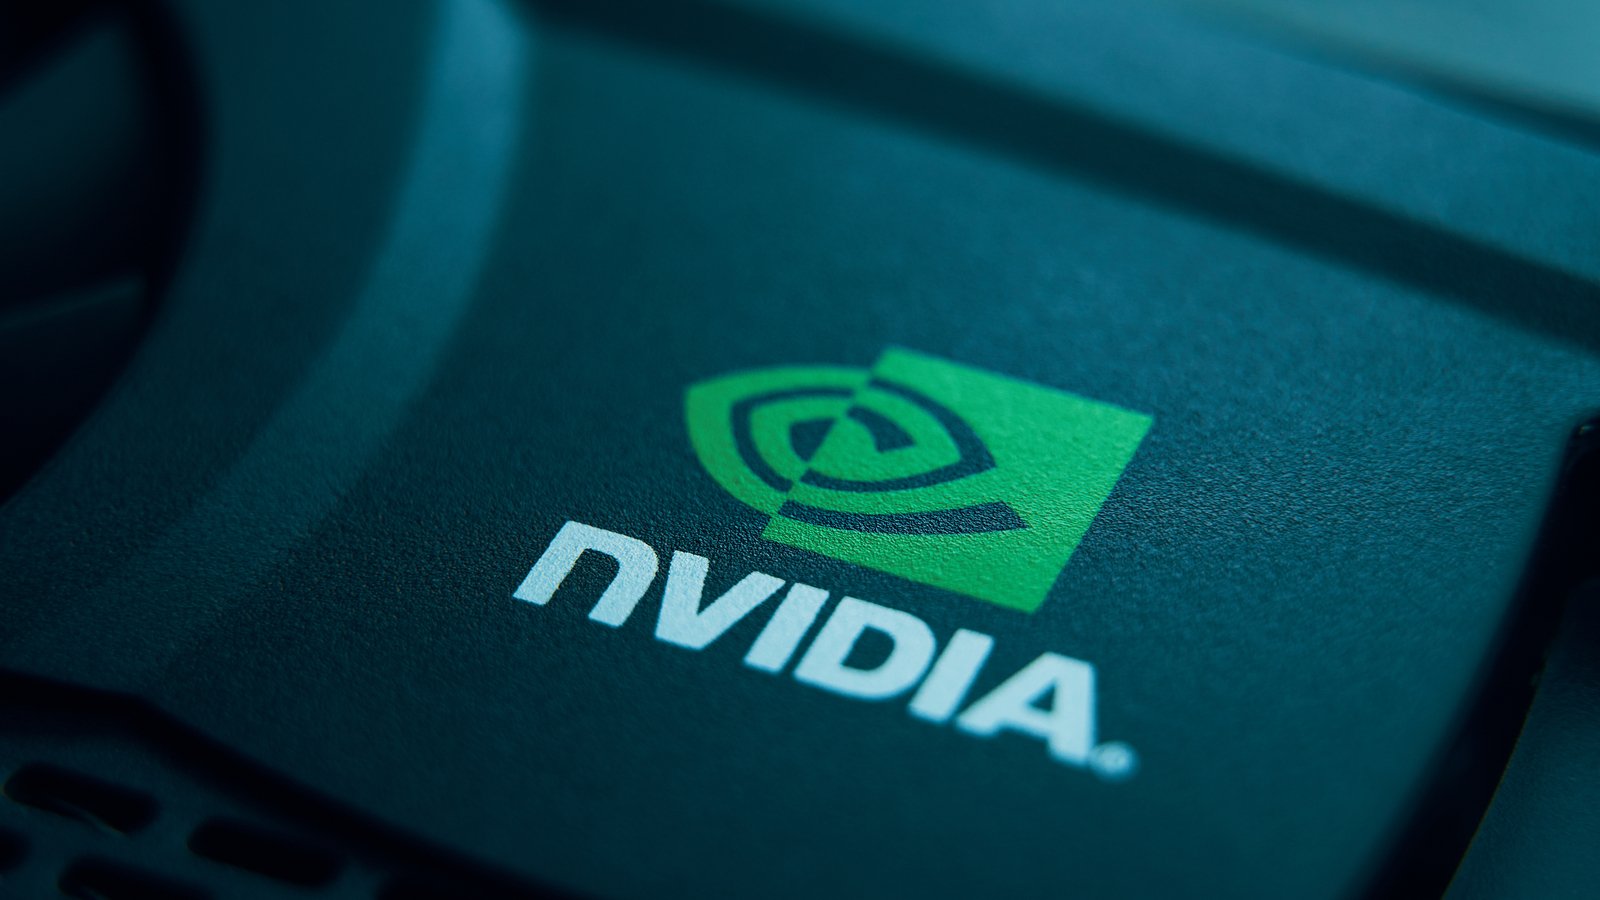 French Authorities Raid NVIDIA Offices Over Suspicions of Anti-Competitive Practices: Report